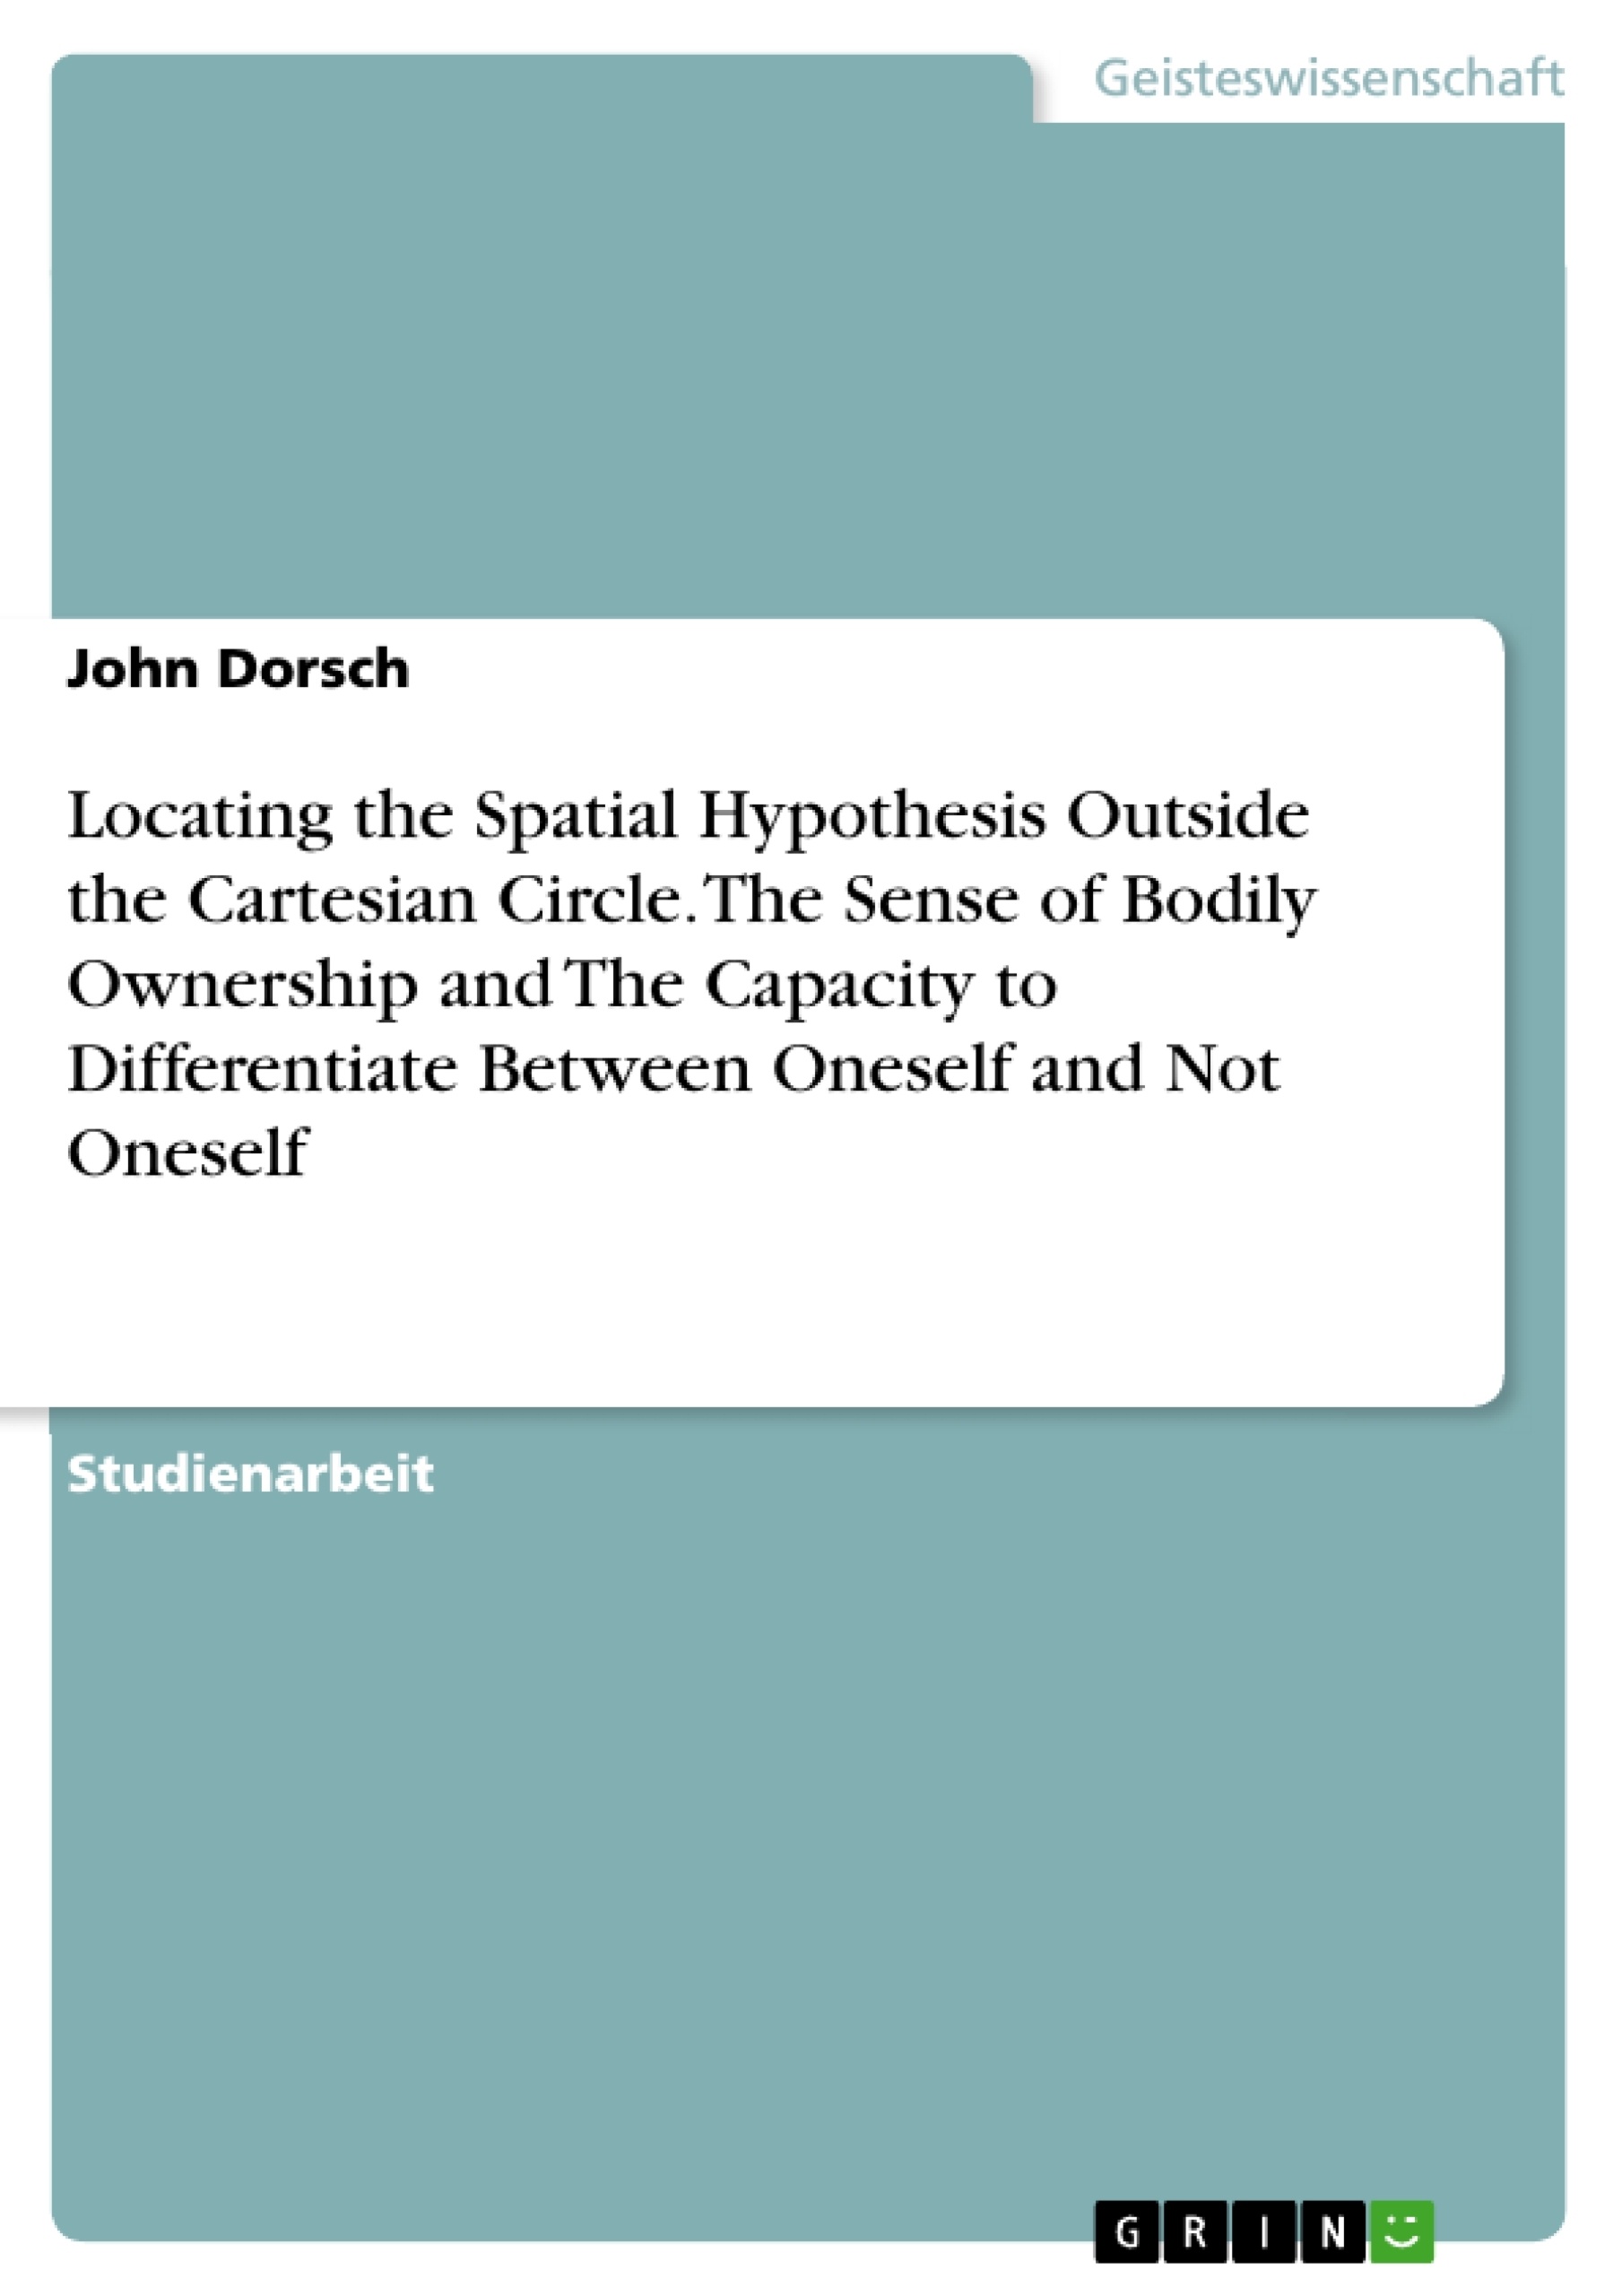 Titel: Locating the Spatial Hypothesis Outside the Cartesian Circle. The Sense of Bodily Ownership and The Capacity to Differentiate Between Oneself and Not Oneself